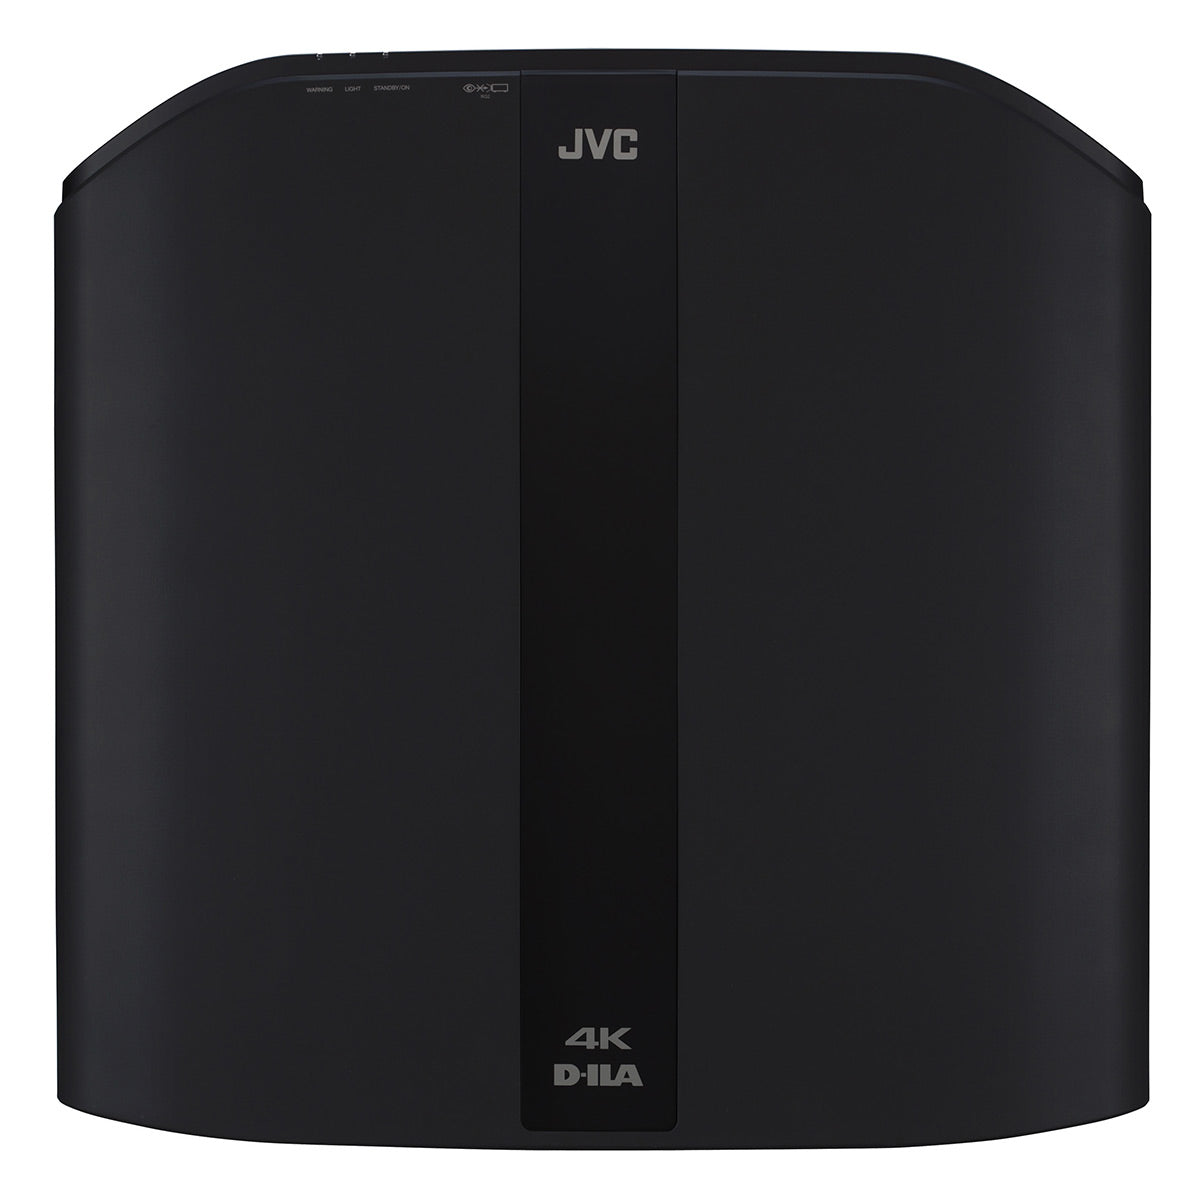 JVC DLA-NP5 D-ILA Native 4K Home Theater Projector with HDR 10+, Auto Calibration, Low Latency, & Filmmaker Mode